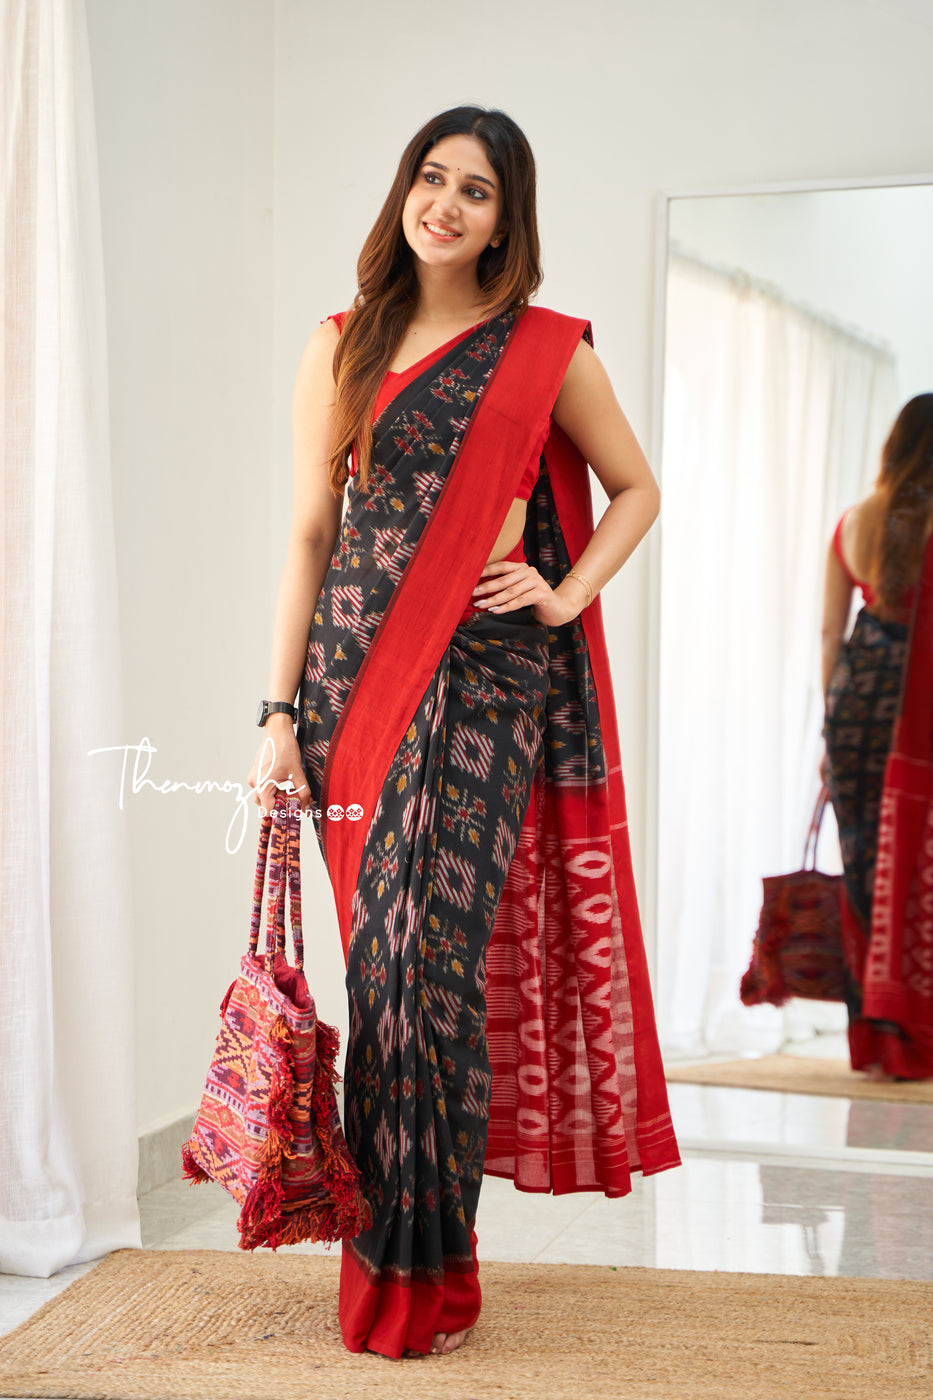 Love Saree For Women And Girls Khadi Cotton In Black And Red Color  Combination Best Quality For Everyday Use